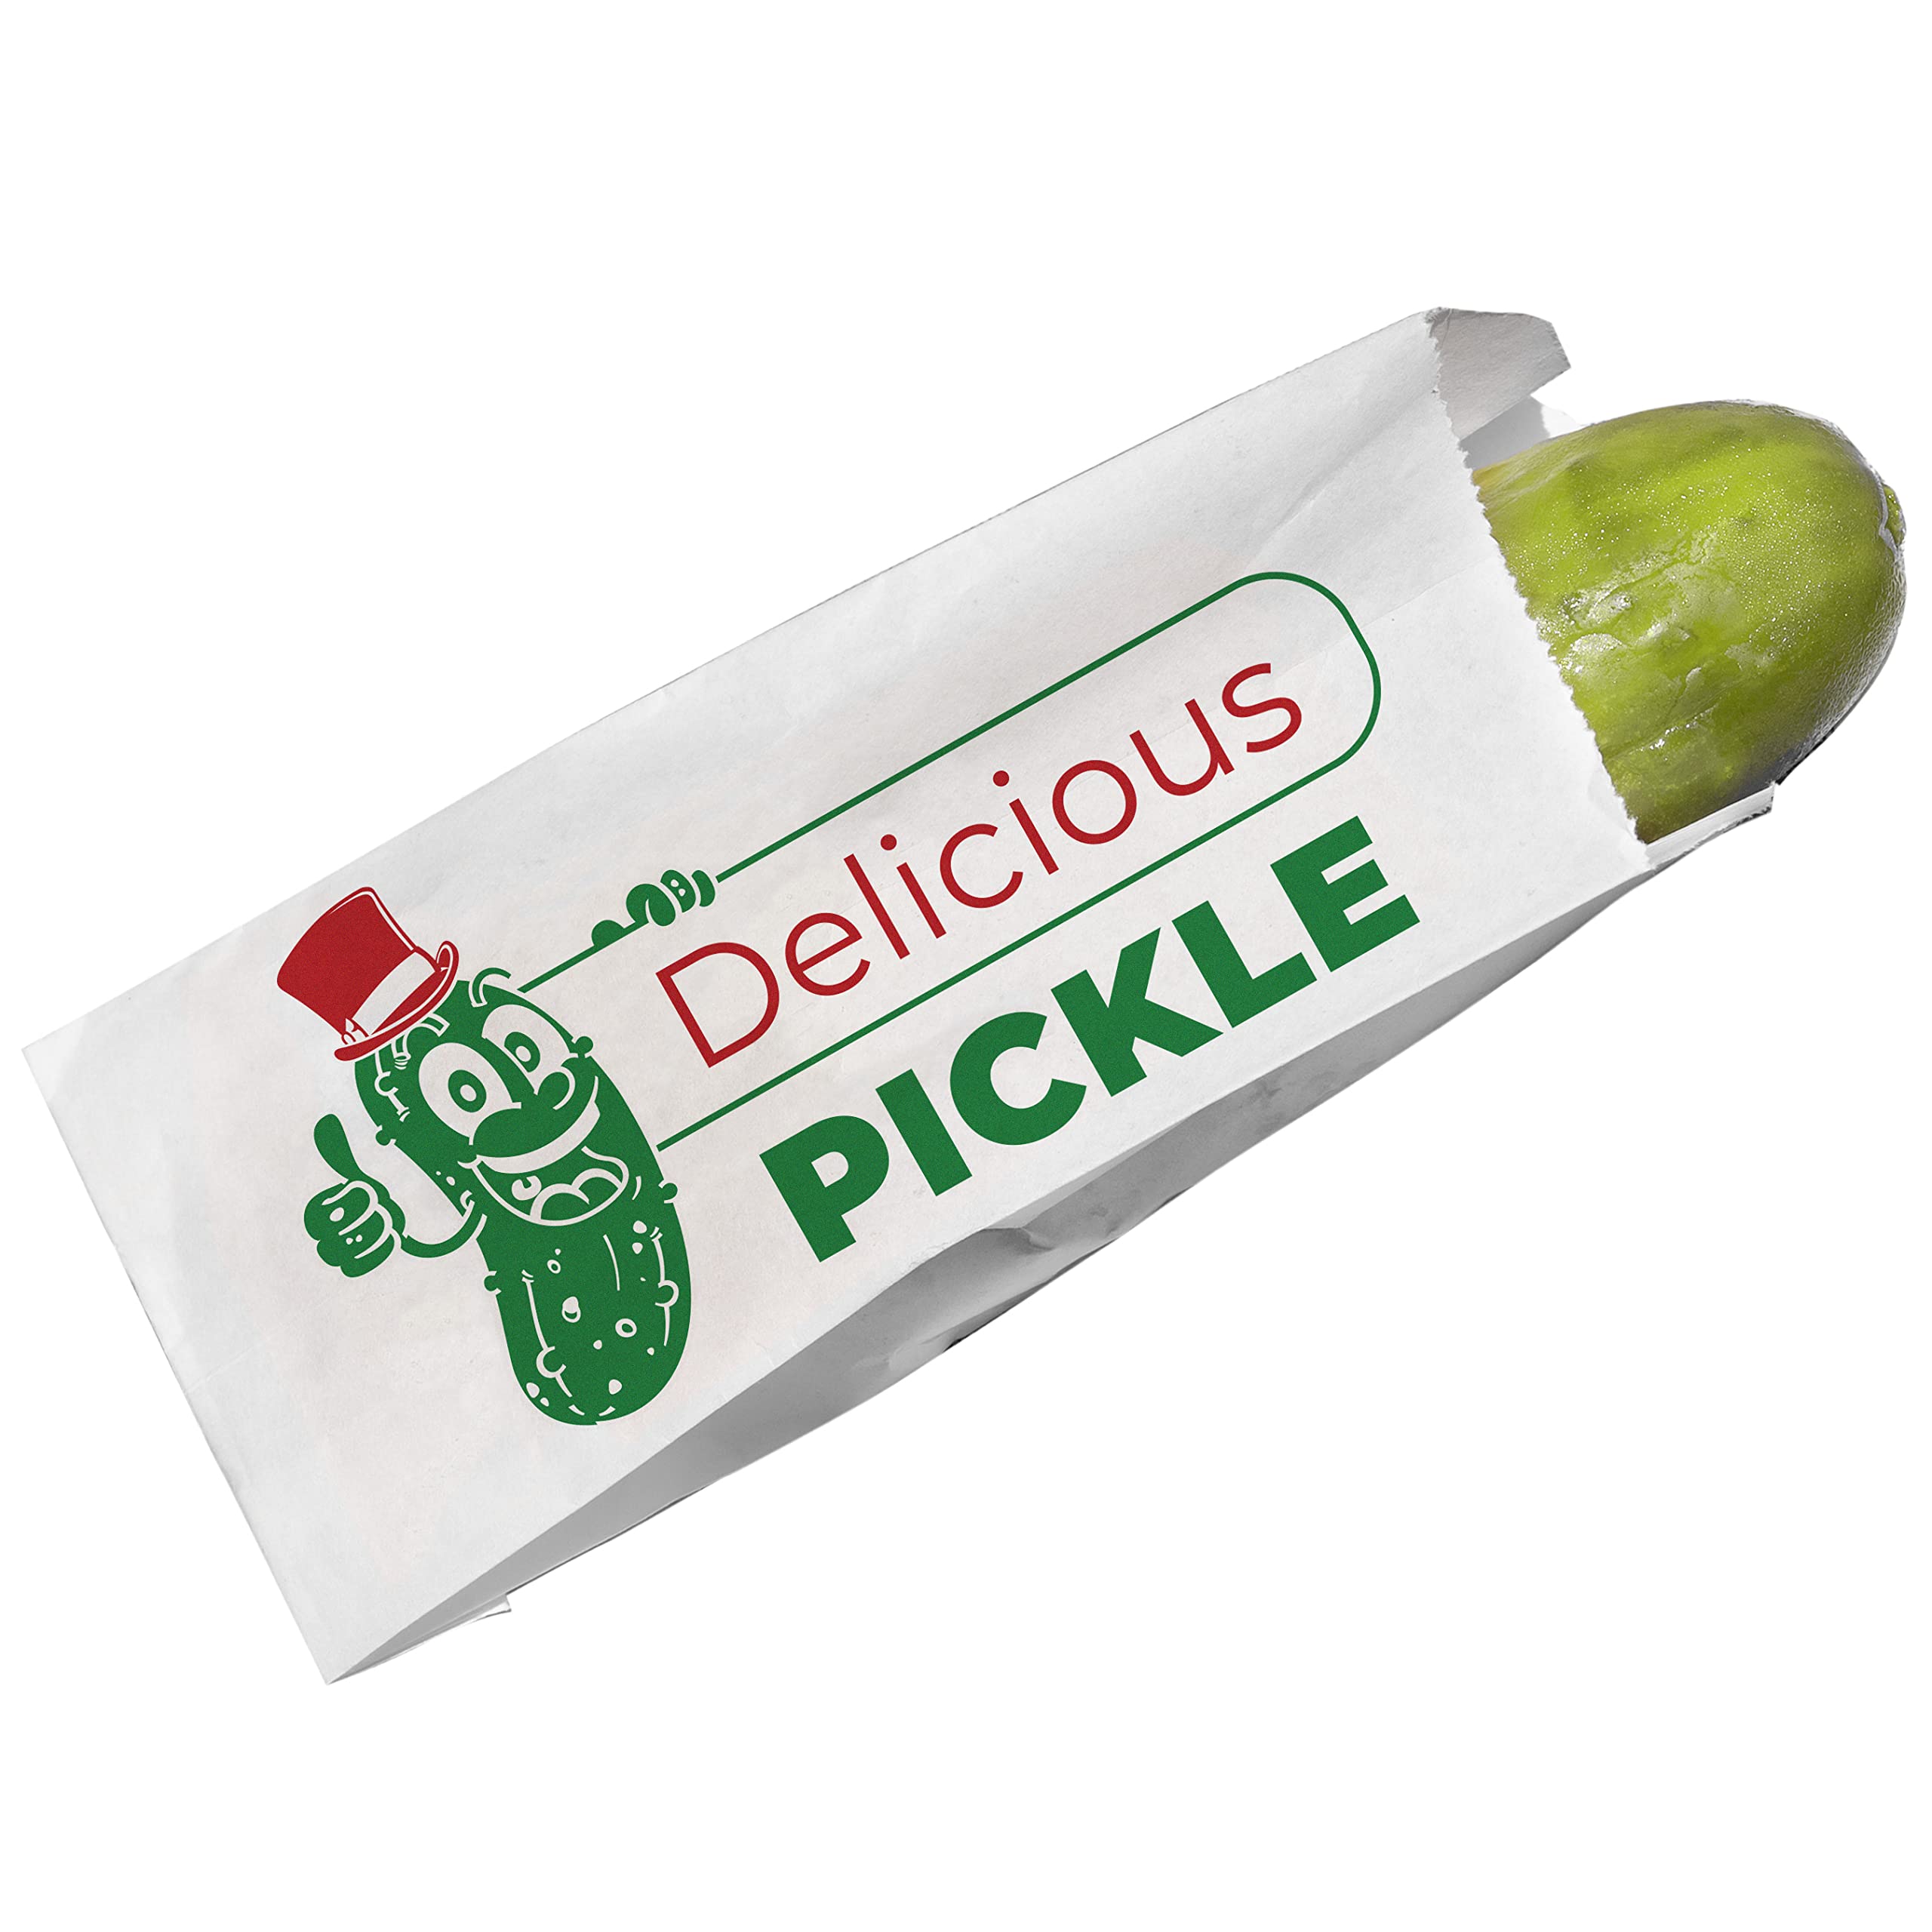 Durable, Retro Design 6.5 in Dill Pickle Bag 100 Pack. Turn Your Party into a Carnival with Classic Vintage Paper Snack Sacks That Keep Pickles Fresh. Mess-Free Bags for Fundraiser or Concession Stand